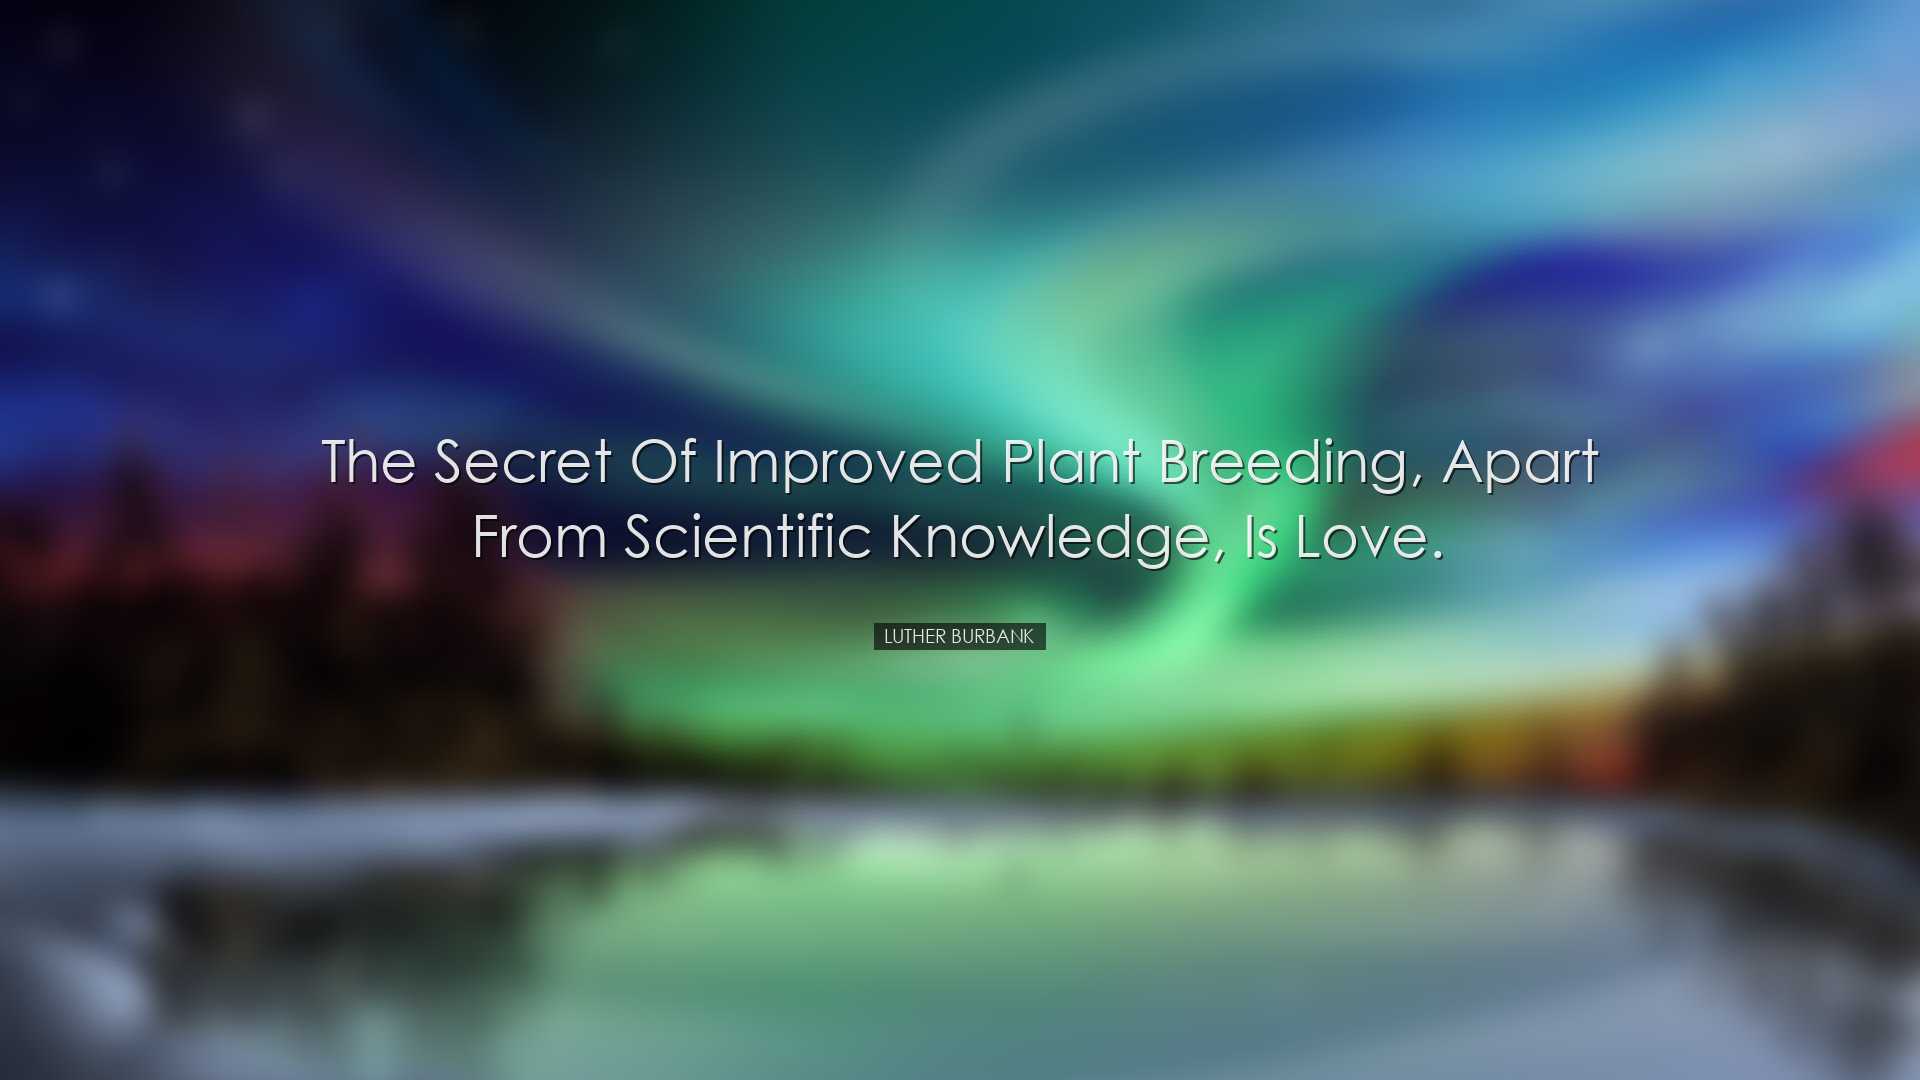 The secret of improved plant breeding, apart from scientific knowl